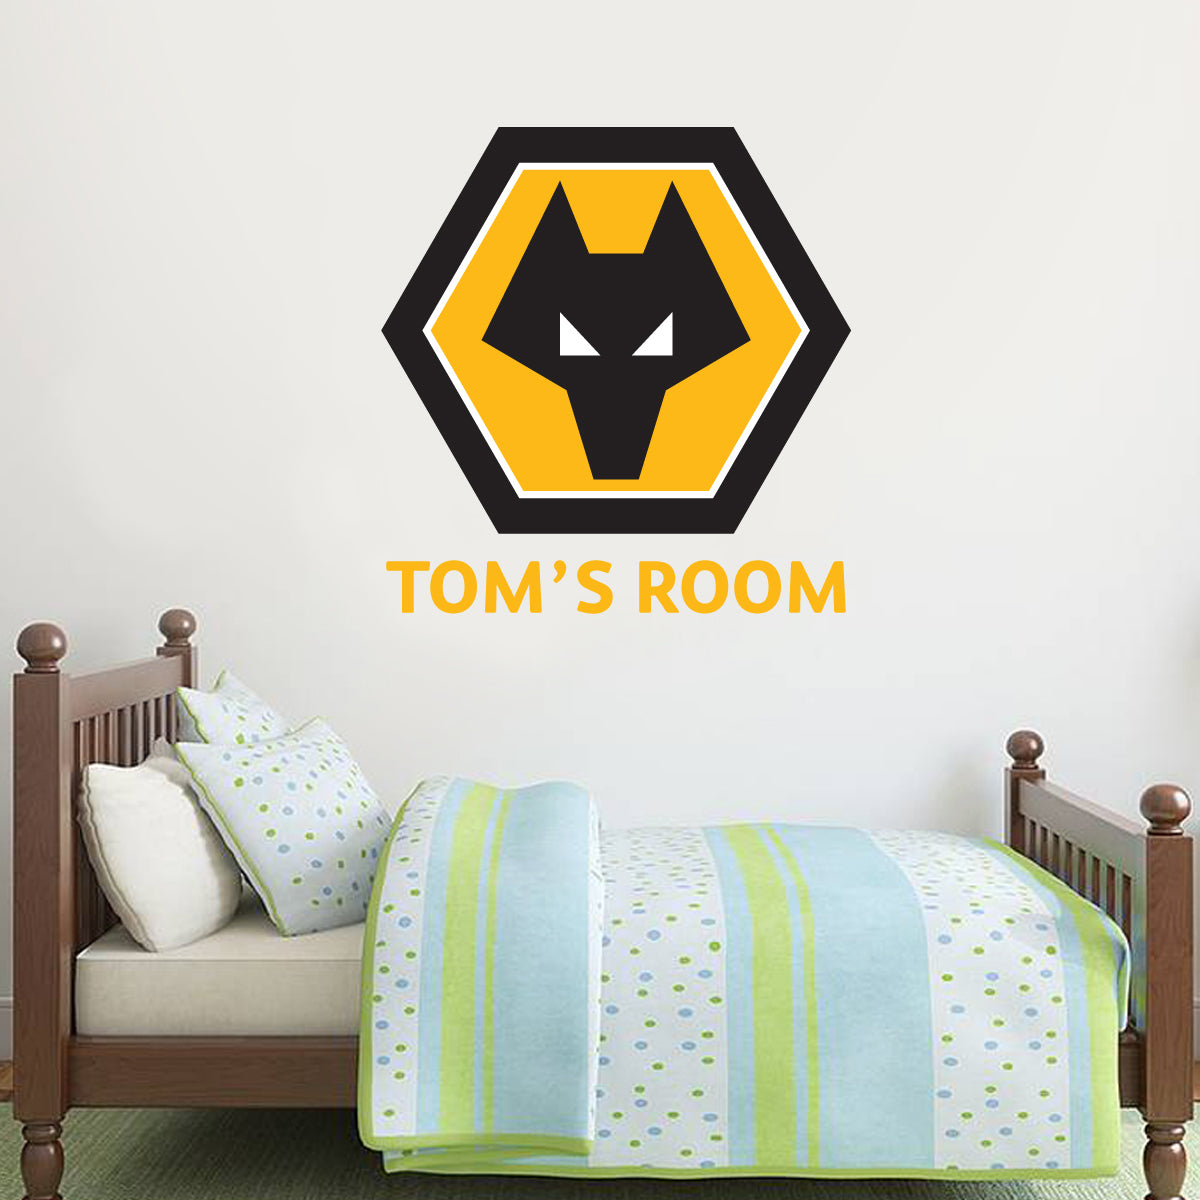 Wolverhampton Wanderers F.C. - Personalised Name & Crest Wall Art + Wolves Wall Sticker Set